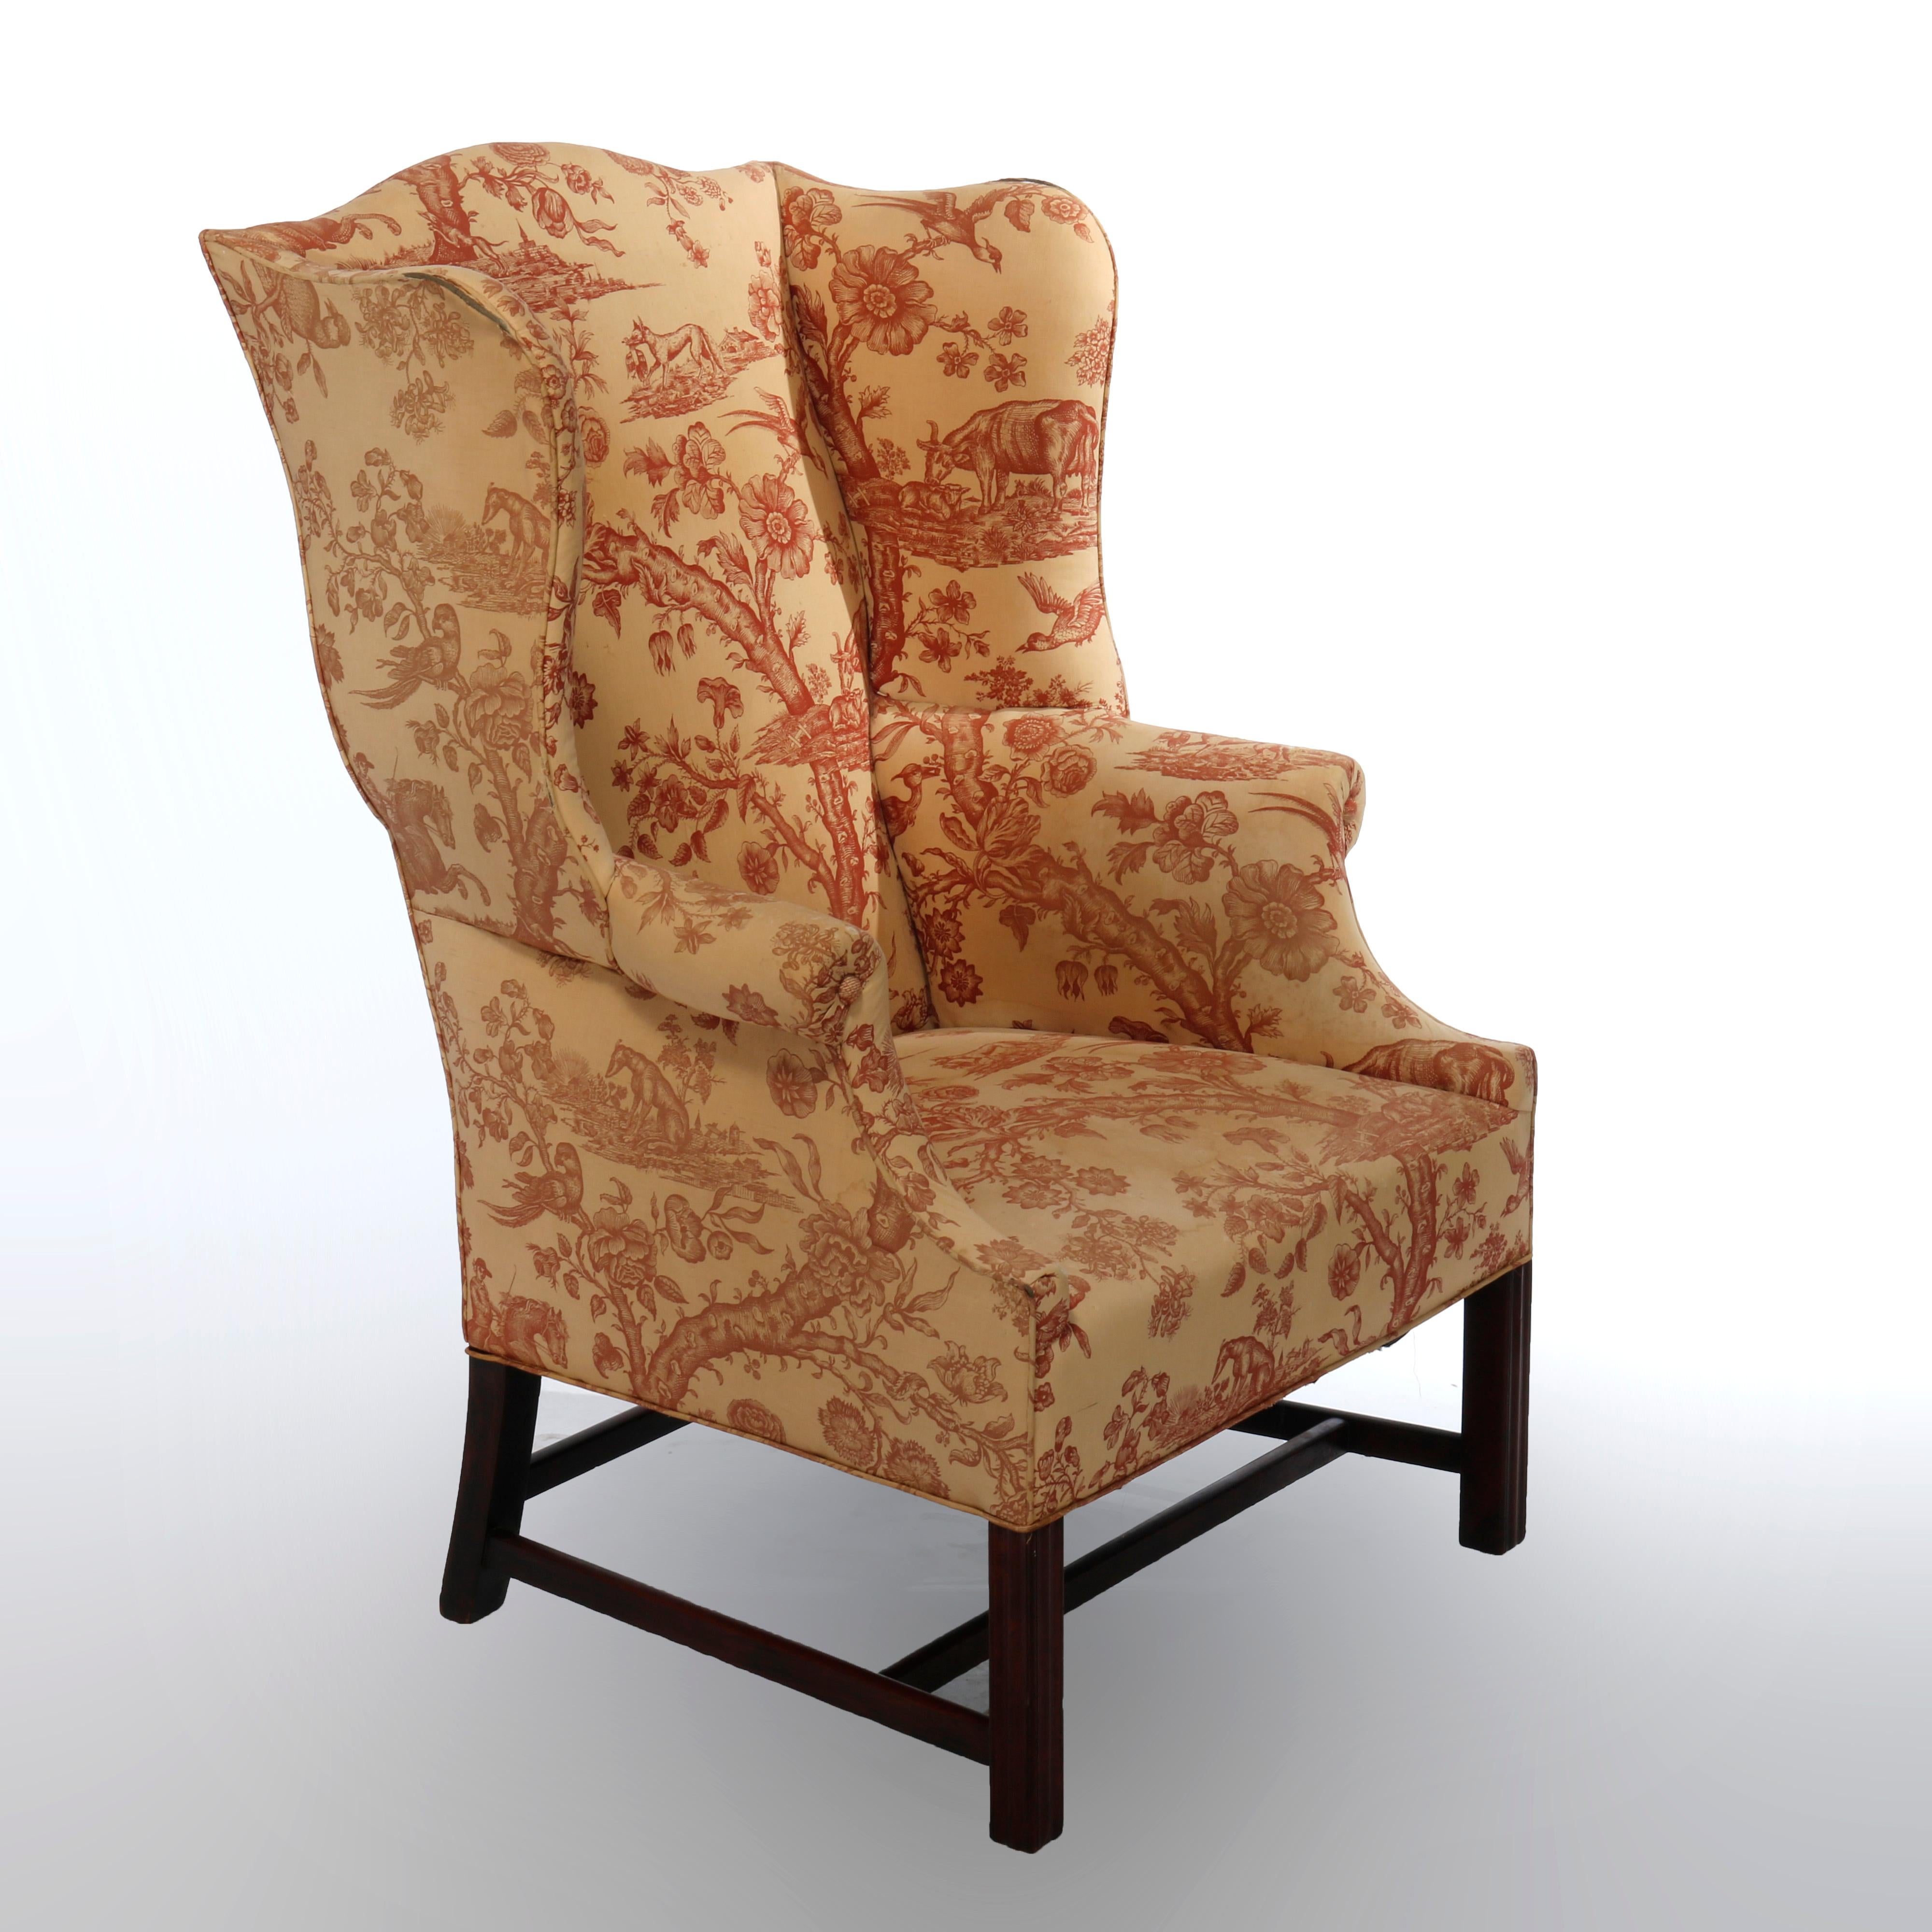 American Antique Chippendale Walnut Wingback Fireside Armchair circa 1780